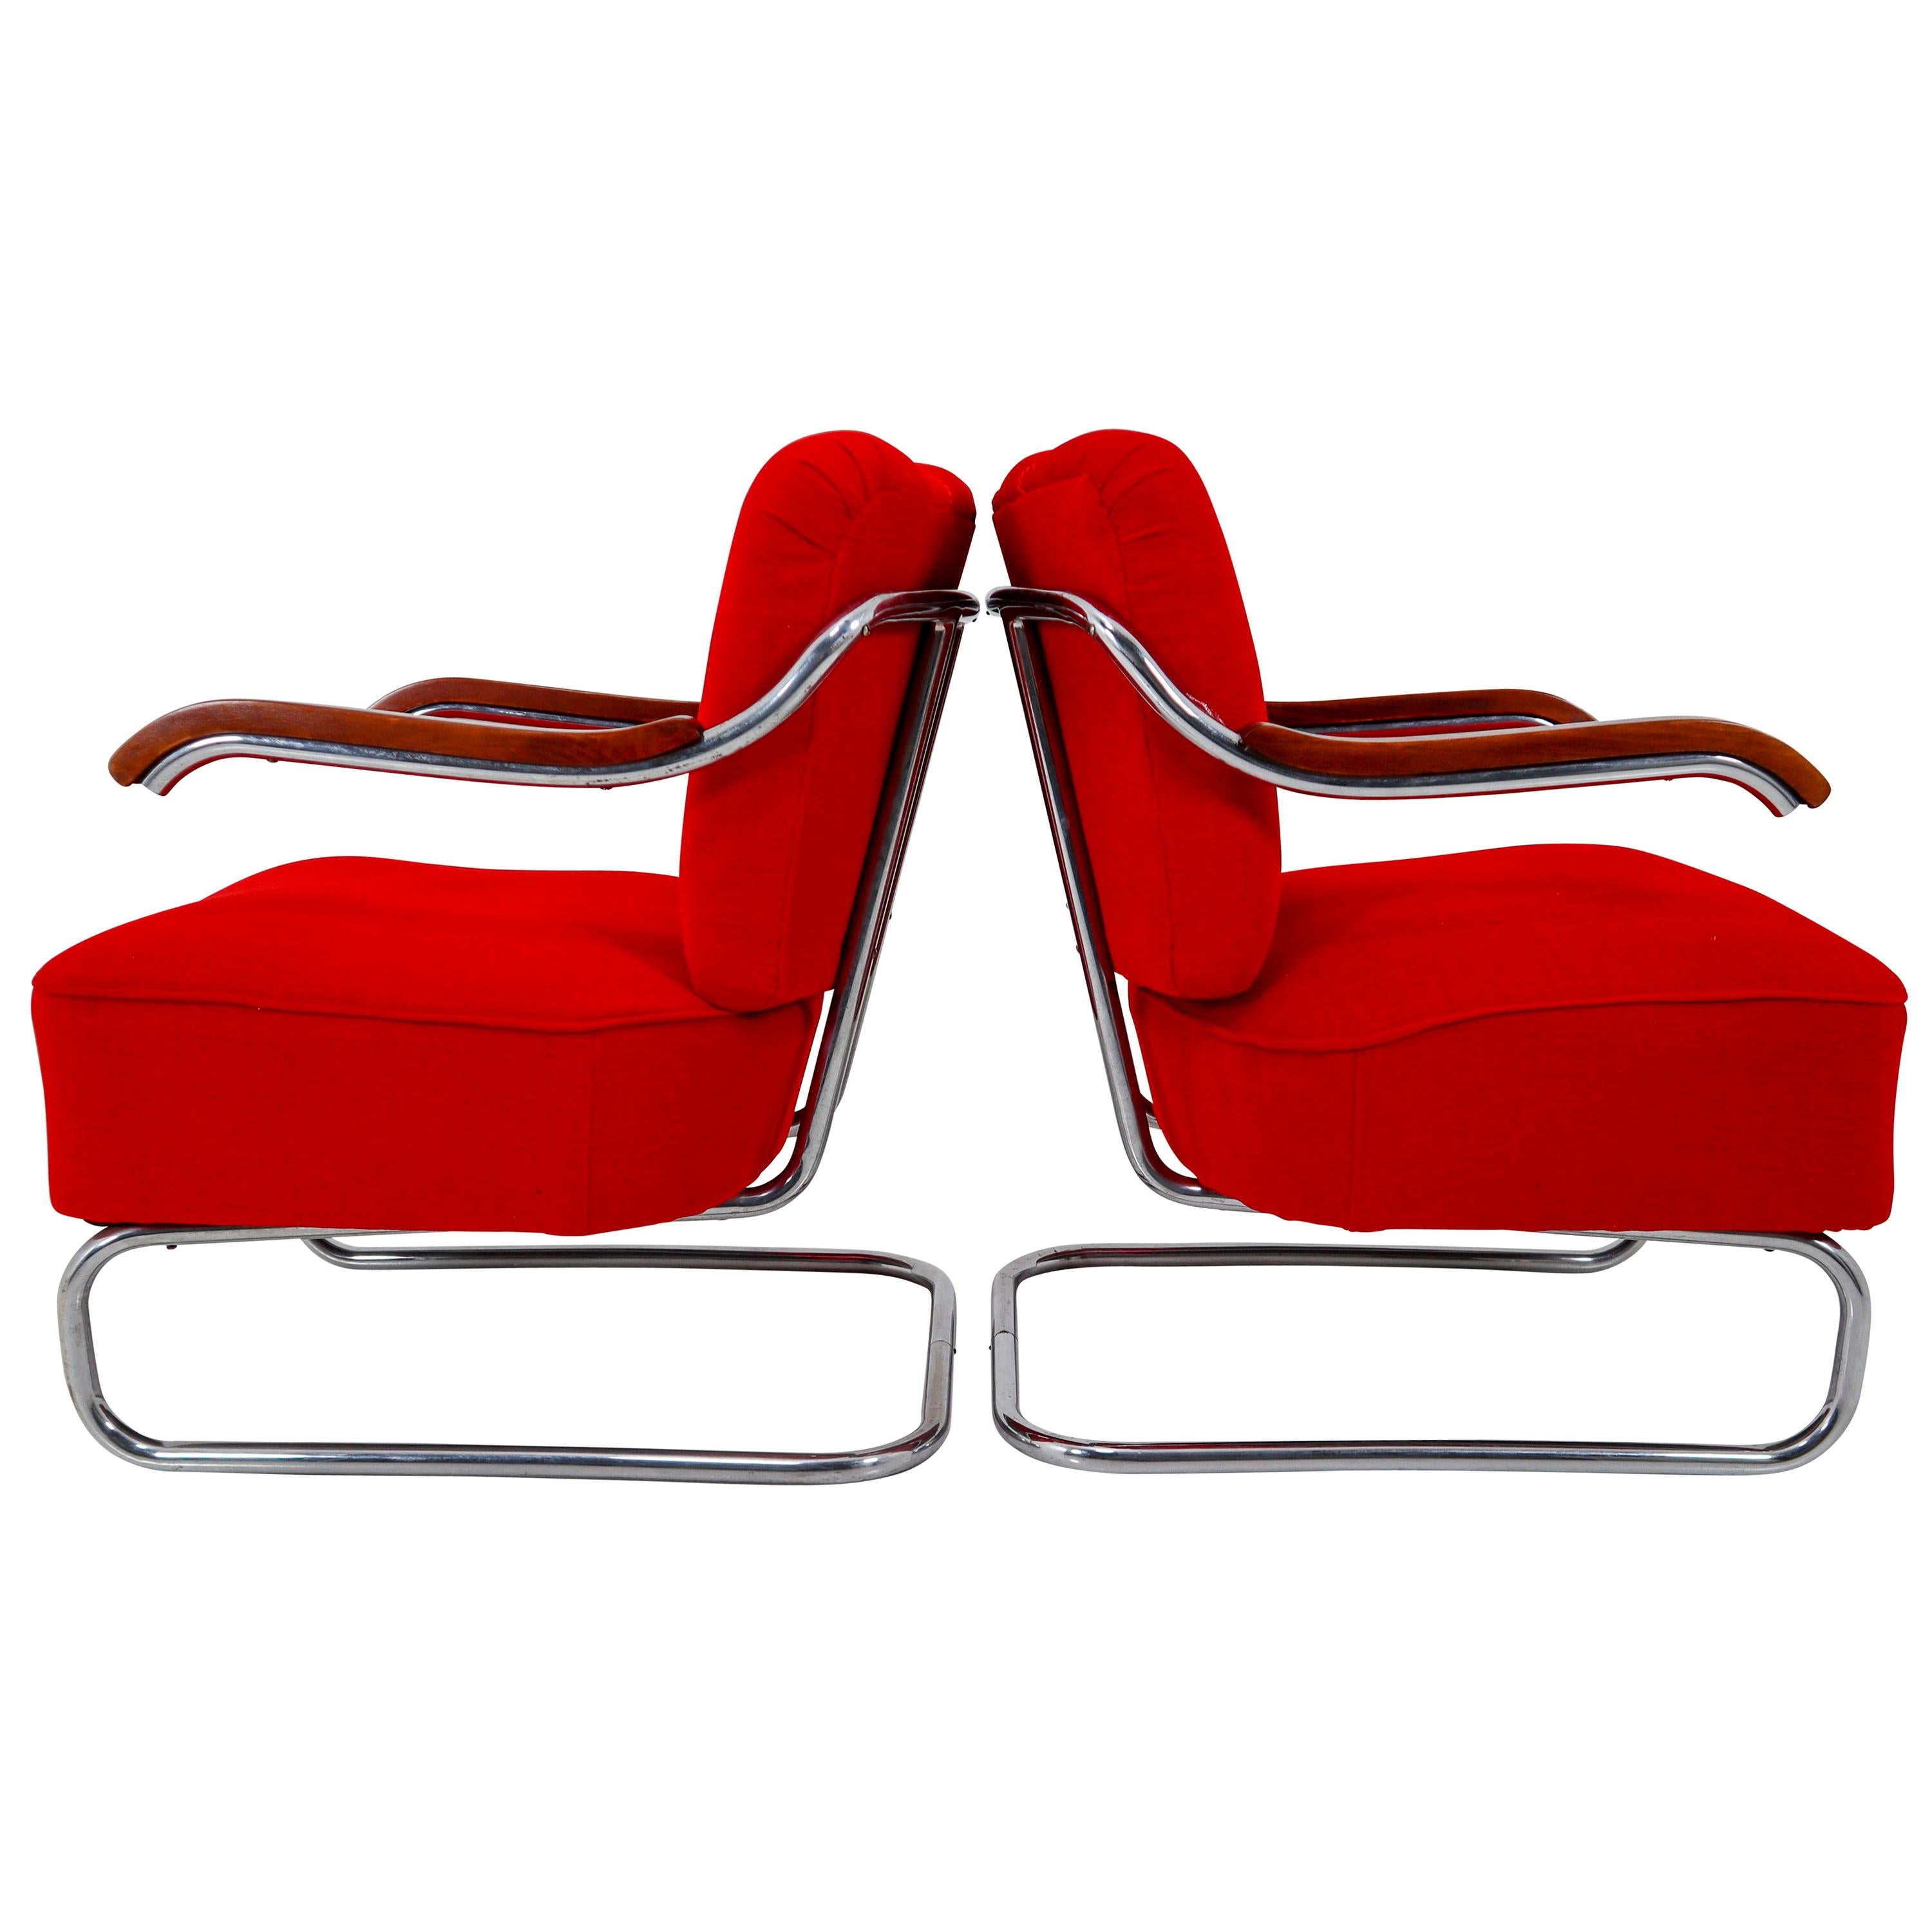 Armchairs by Thonet circa 1920s Midcentury Bauhaus Period in Red Fabric